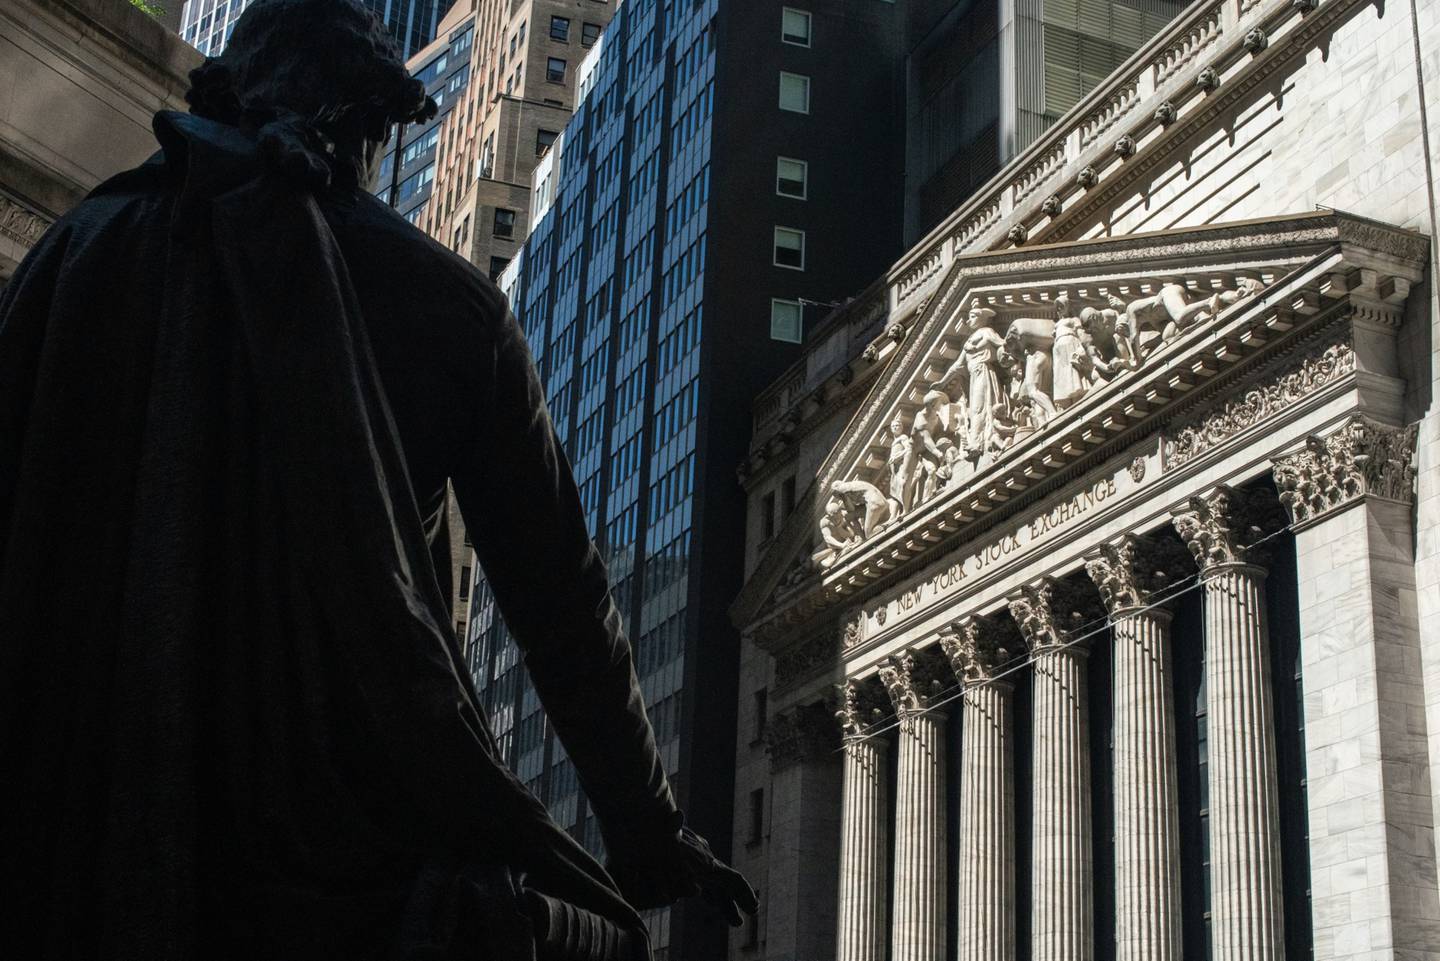 A statue of George Washington stands outside Federal Hall near the New York Stock Exchange (NYSE) in New York, U.S.,Photographer: Jeenah Moon/Bloomberg